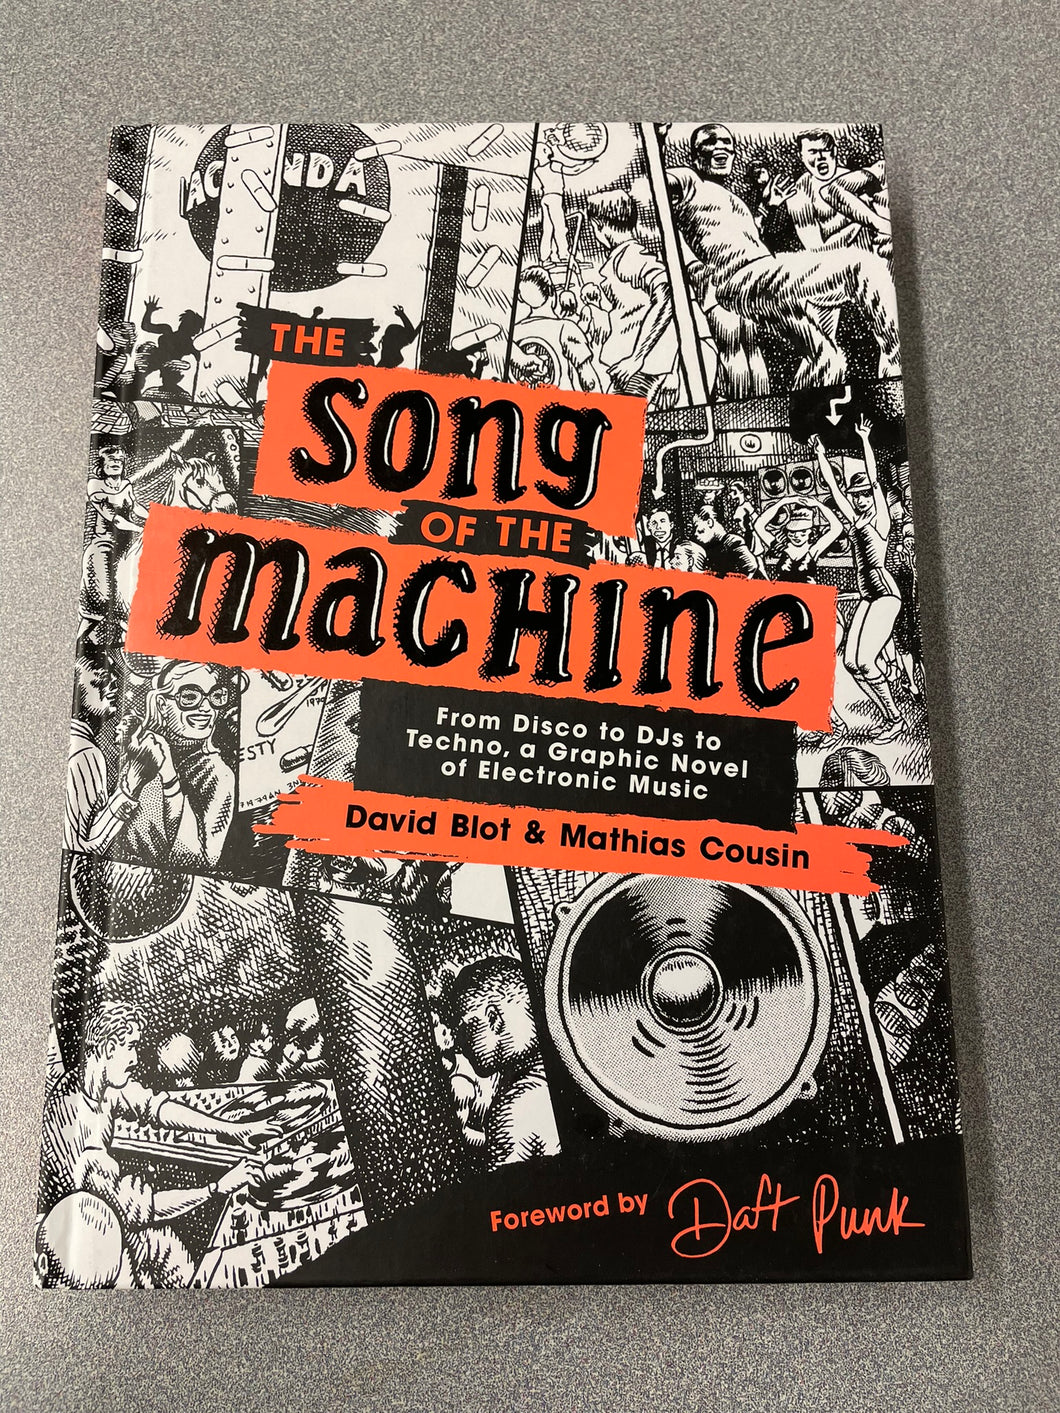 The Song of the Machine: From Disco to DJs to Techno, a Graphic Novel of Electronic Music, Blot, David and Mathias Cousin [2016] GN 1/23